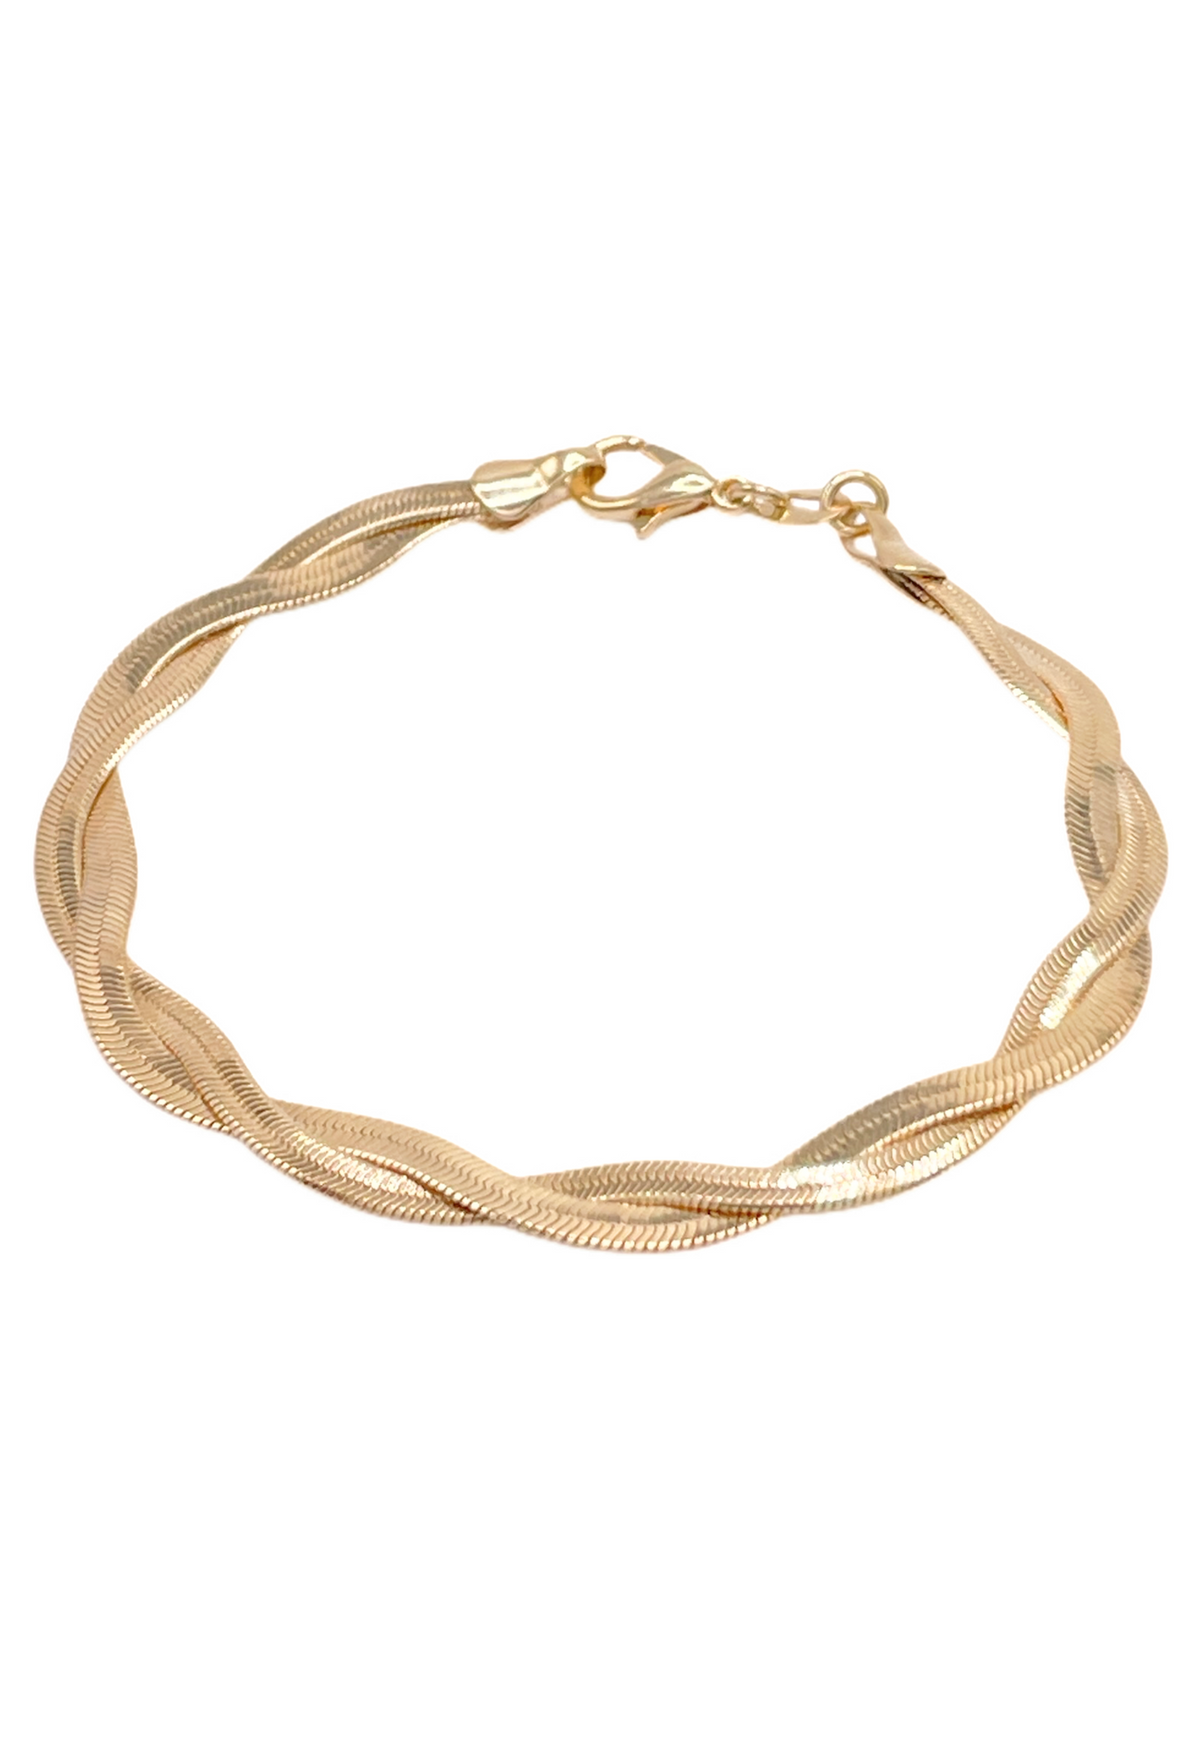 Twisted Herringbone Bracelet by Dylan Rae Jewelry - 3mm diameter, sleek design with a modern shine, lightweight for fluid movement, secured with a lobster clasp closure - Elevate your style with timeless elegance.